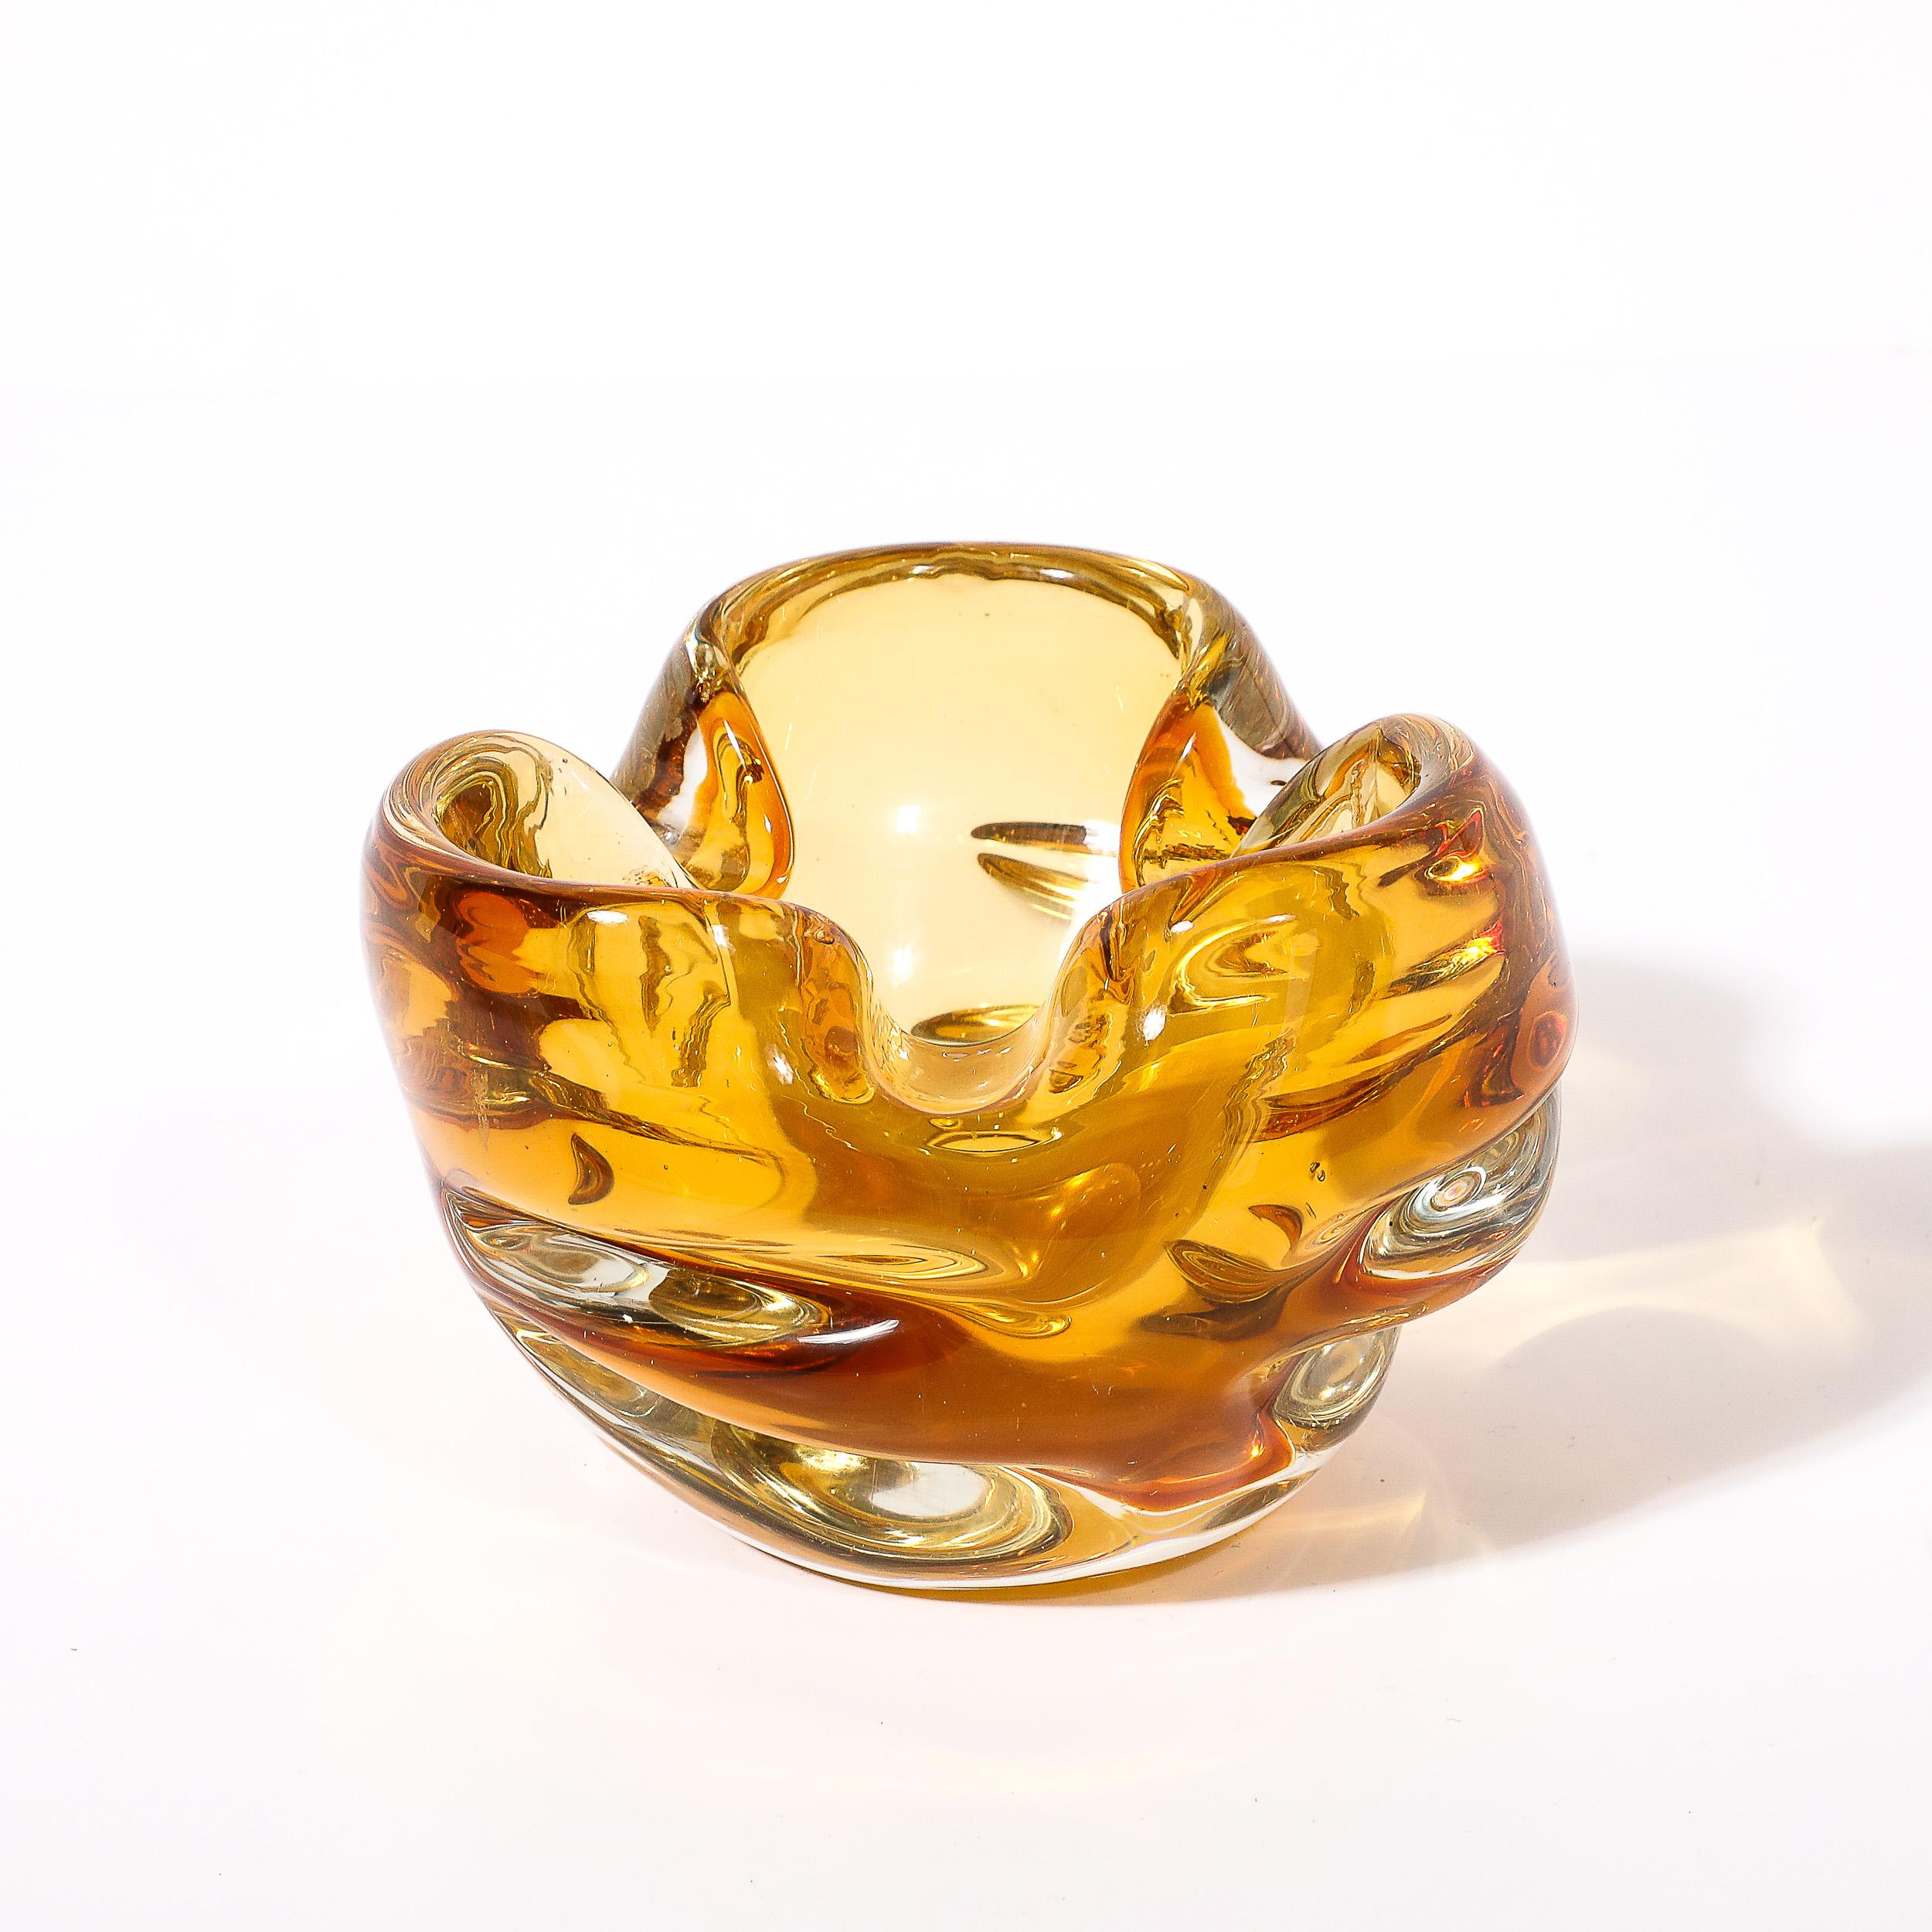 This elegantly formed and organic Mid-Century Modernist Hand-Blown Murano Glass Dish with Indented Detailing in Amber originates from Italy, Circa 1960. Features a beautiful expansion and contraction achieved by the ripples in the edge from three